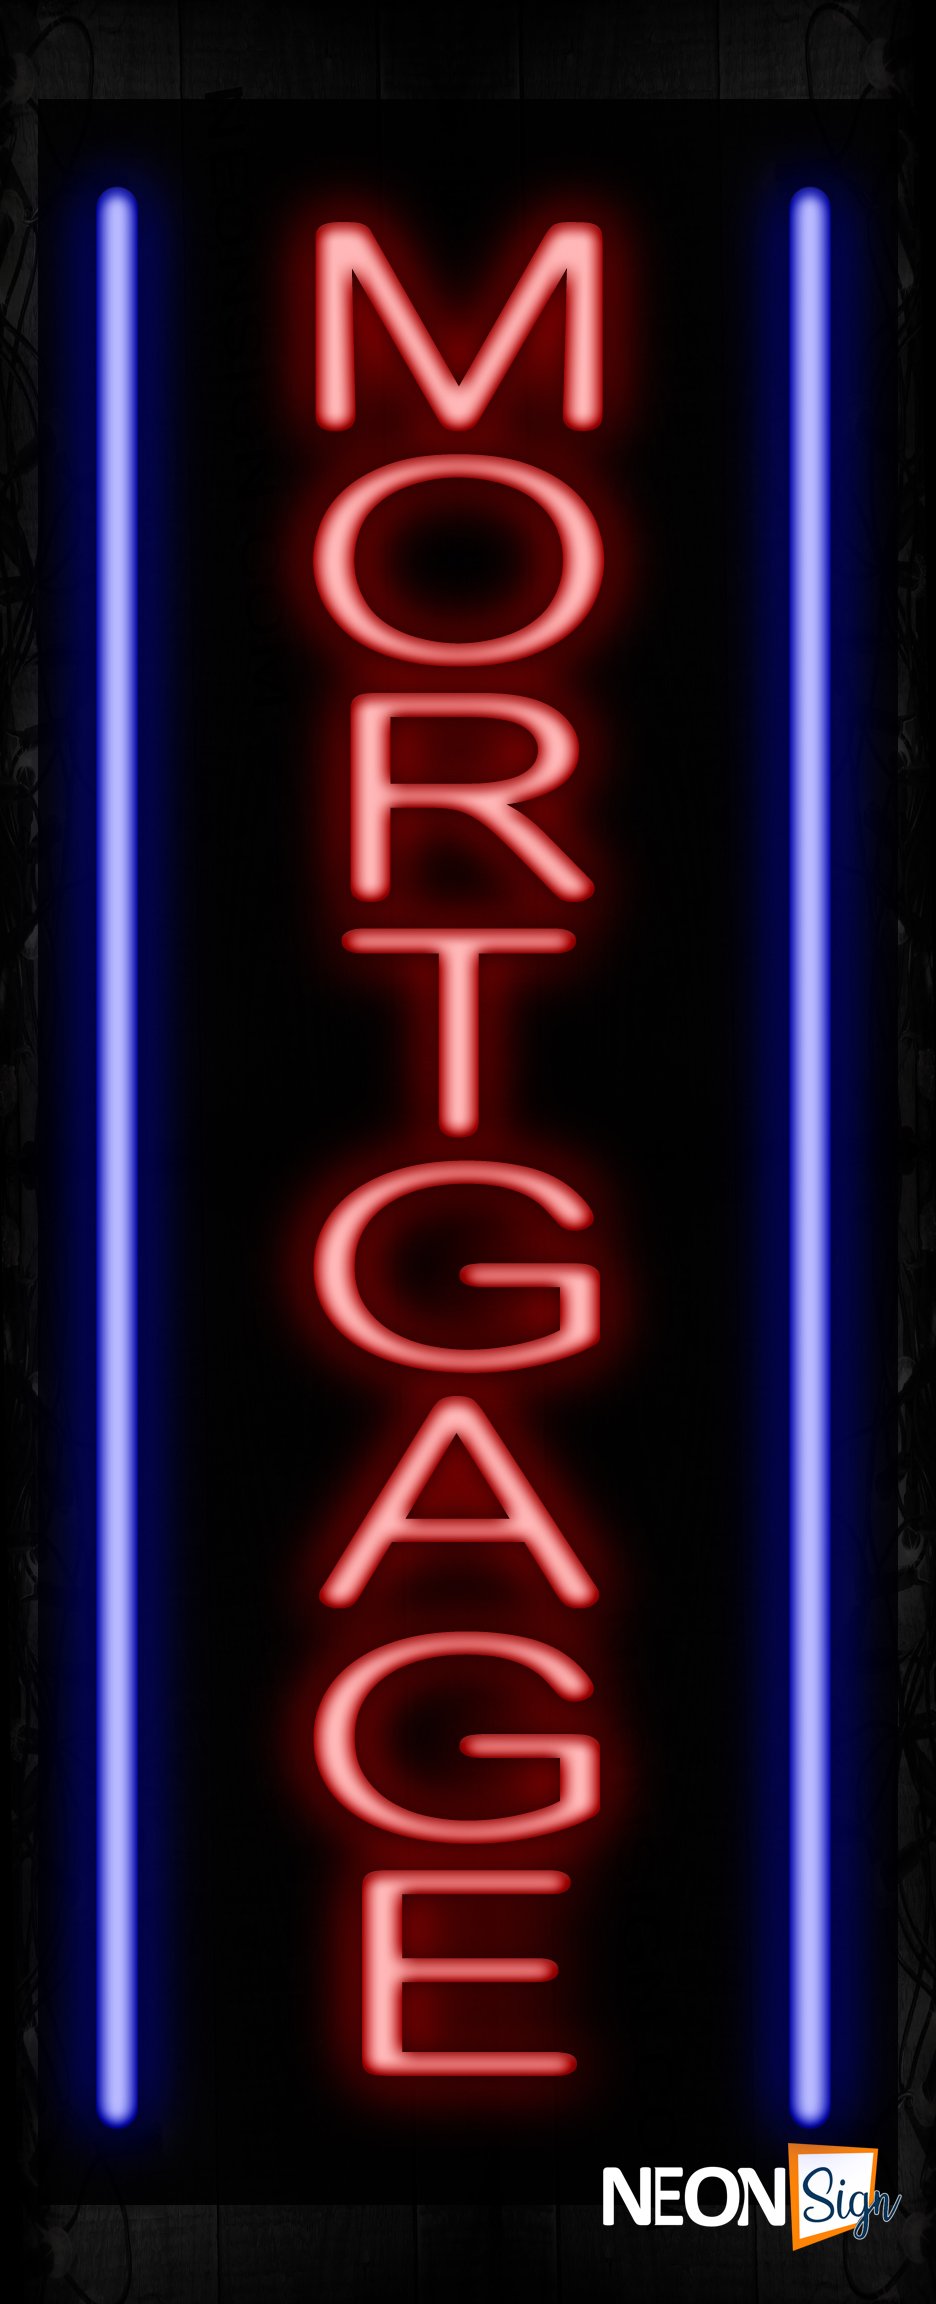 Image of 11592 Mortgage in red with blue border (Vertical) Neon Signs_32 x12 Black Backing